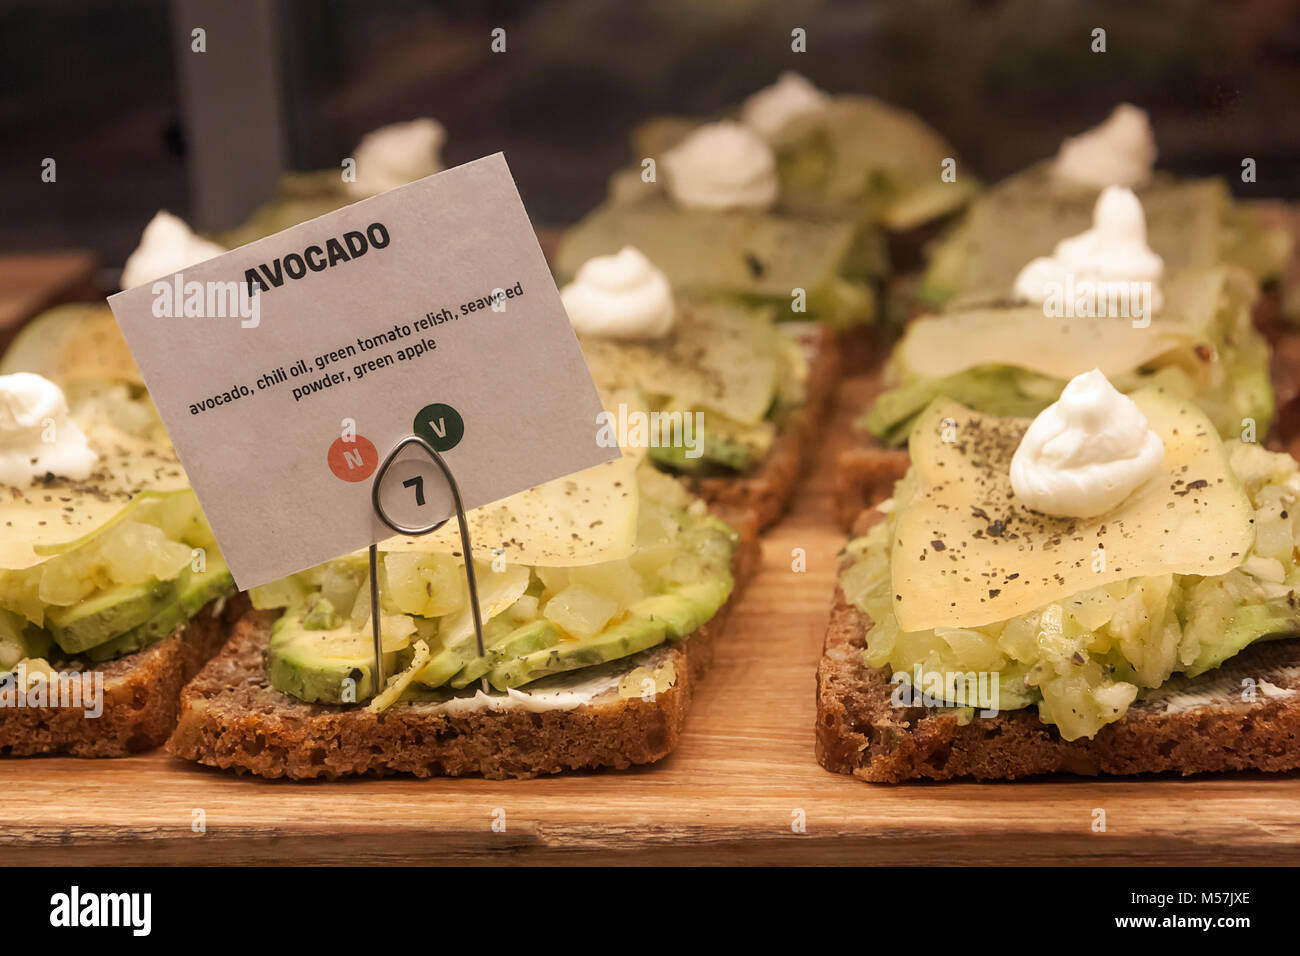 Sign for an avocado open sandwich on display in a food court restaurant. Stock Photo